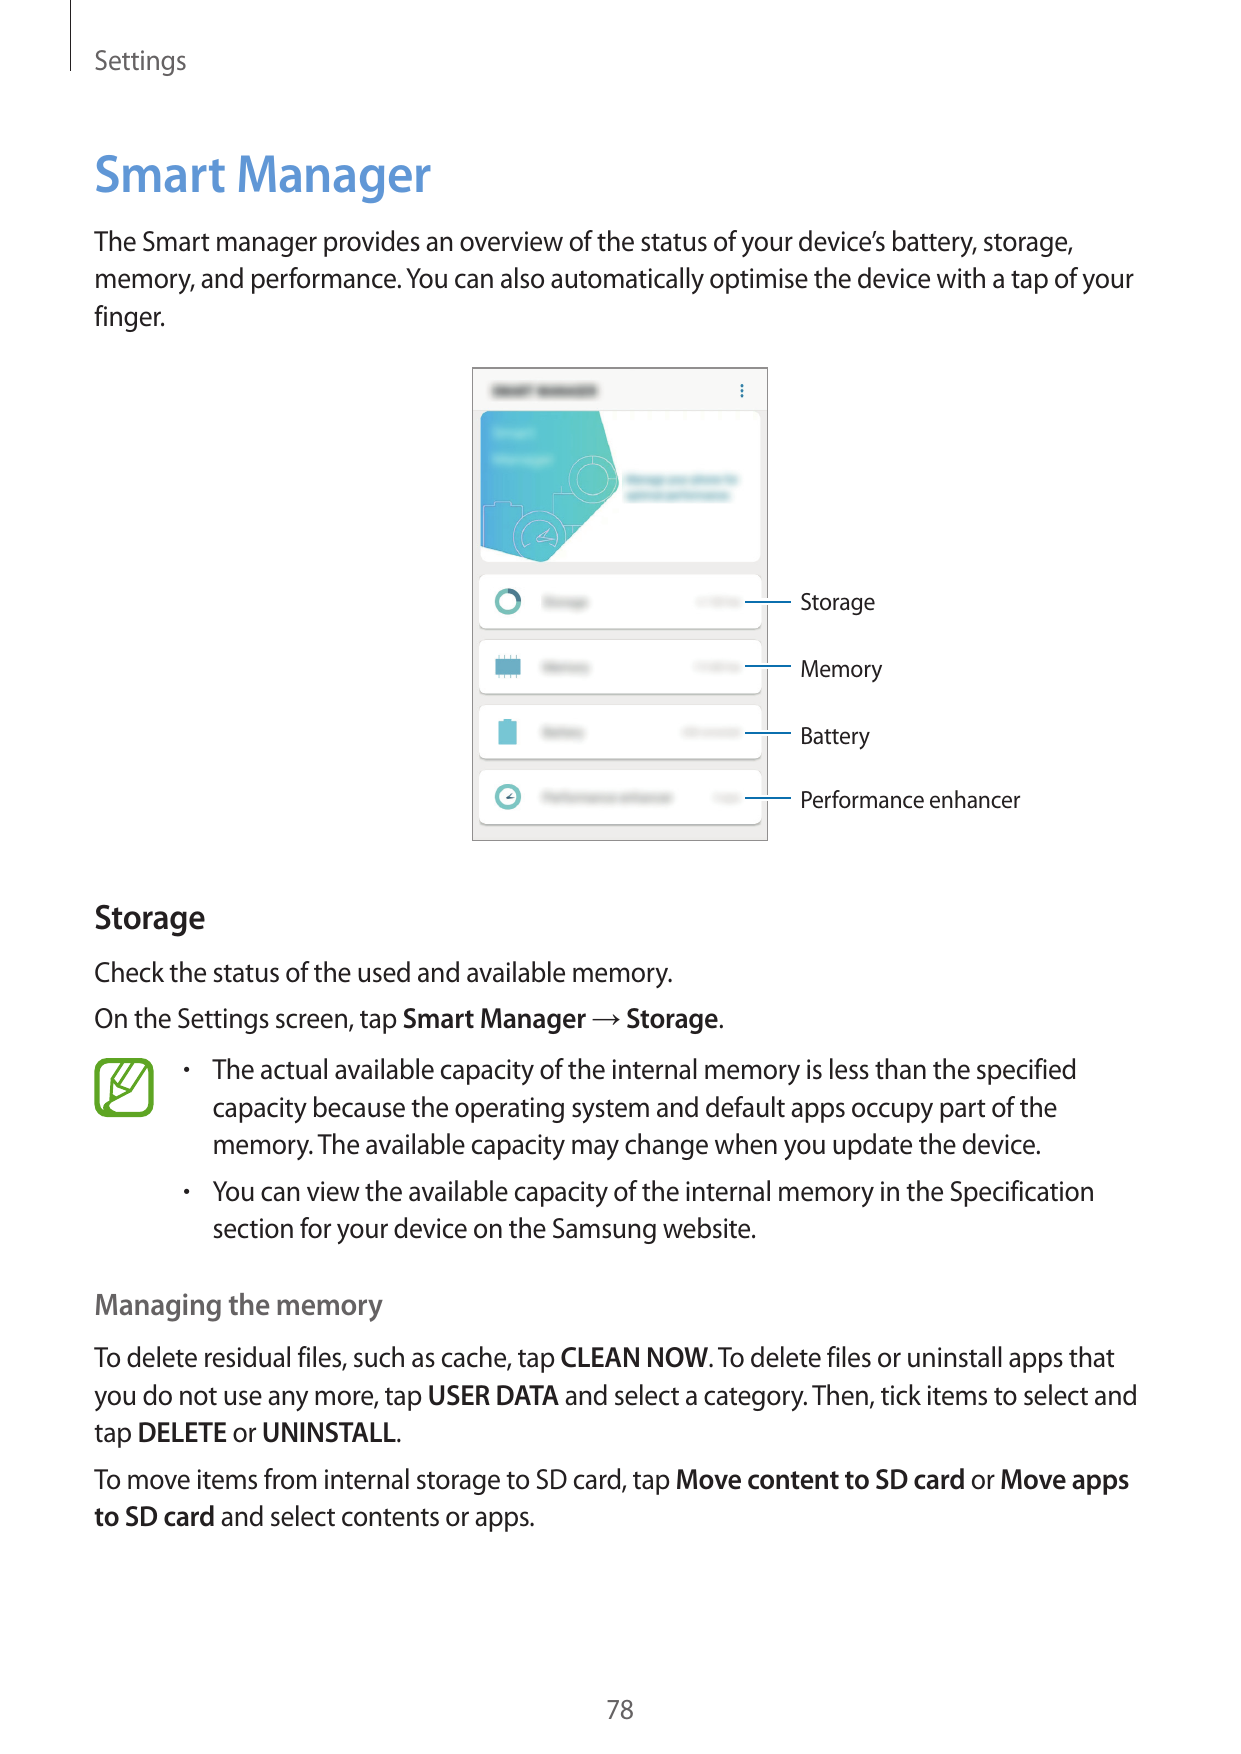 SettingsSmart ManagerThe Smart manager provides an overview of the status of your device’s battery, storage,memory, and performa